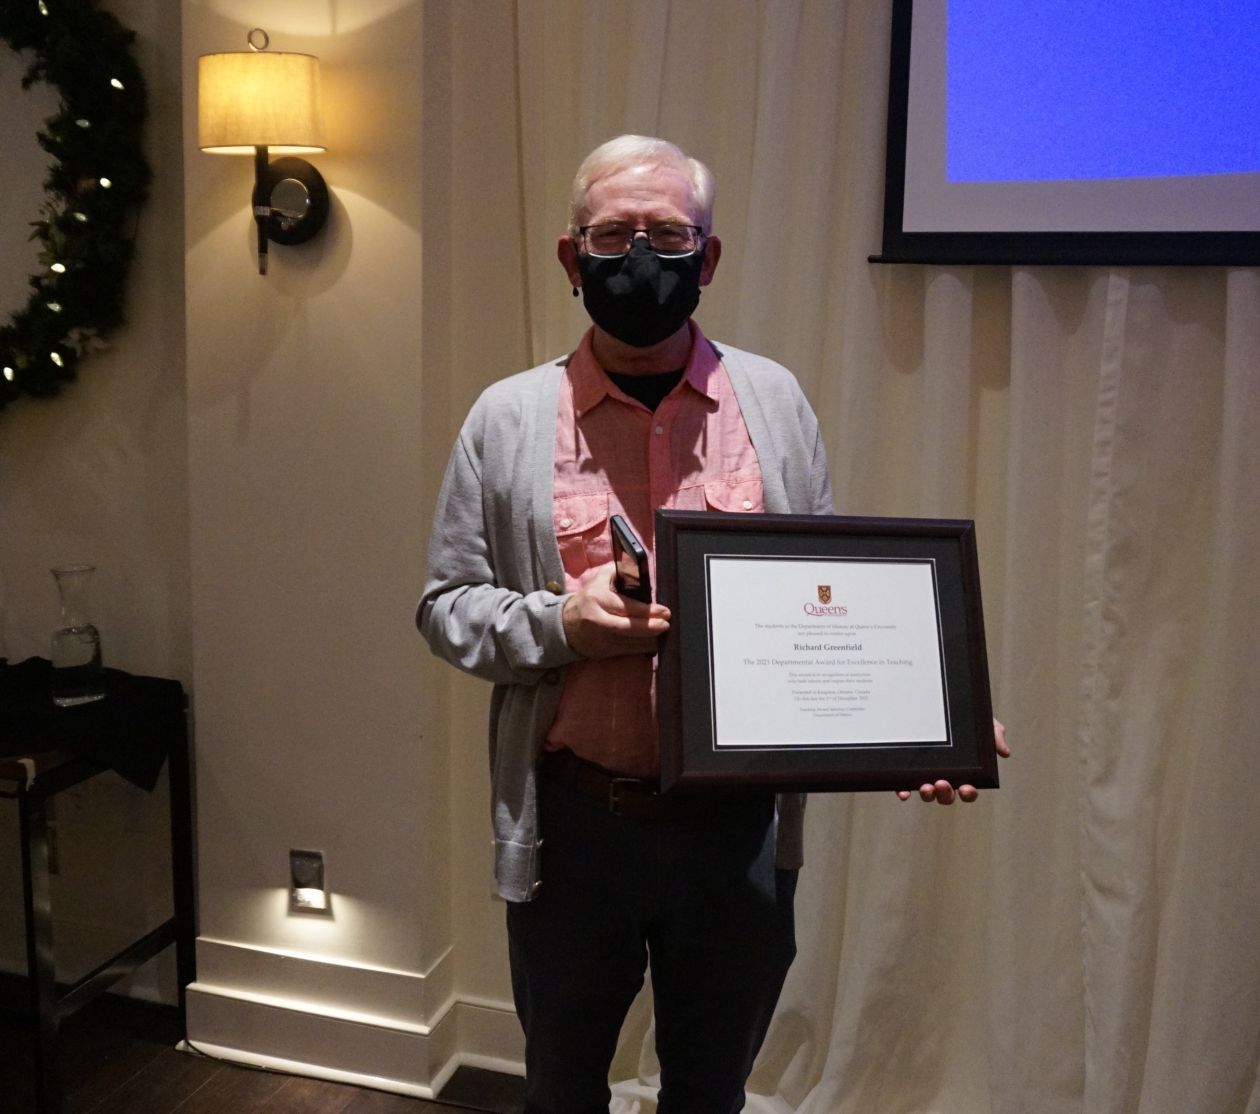 Richard Greenfield holds his Faculty Teaching Award certificate at the University Club